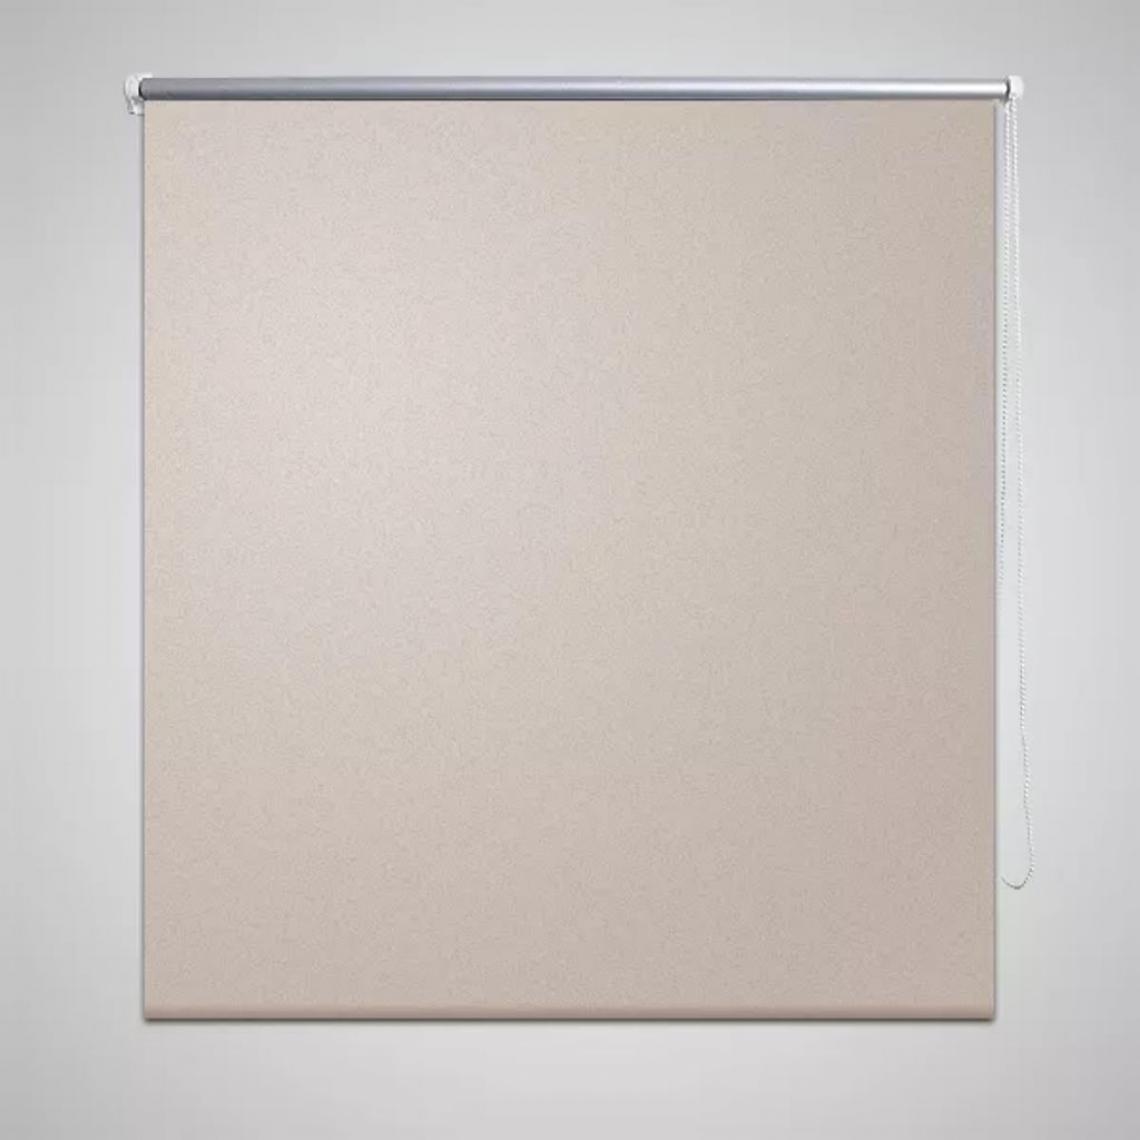 Chunhelife - Store enrouleur occultant 160 x 230 cm beige - Store banne